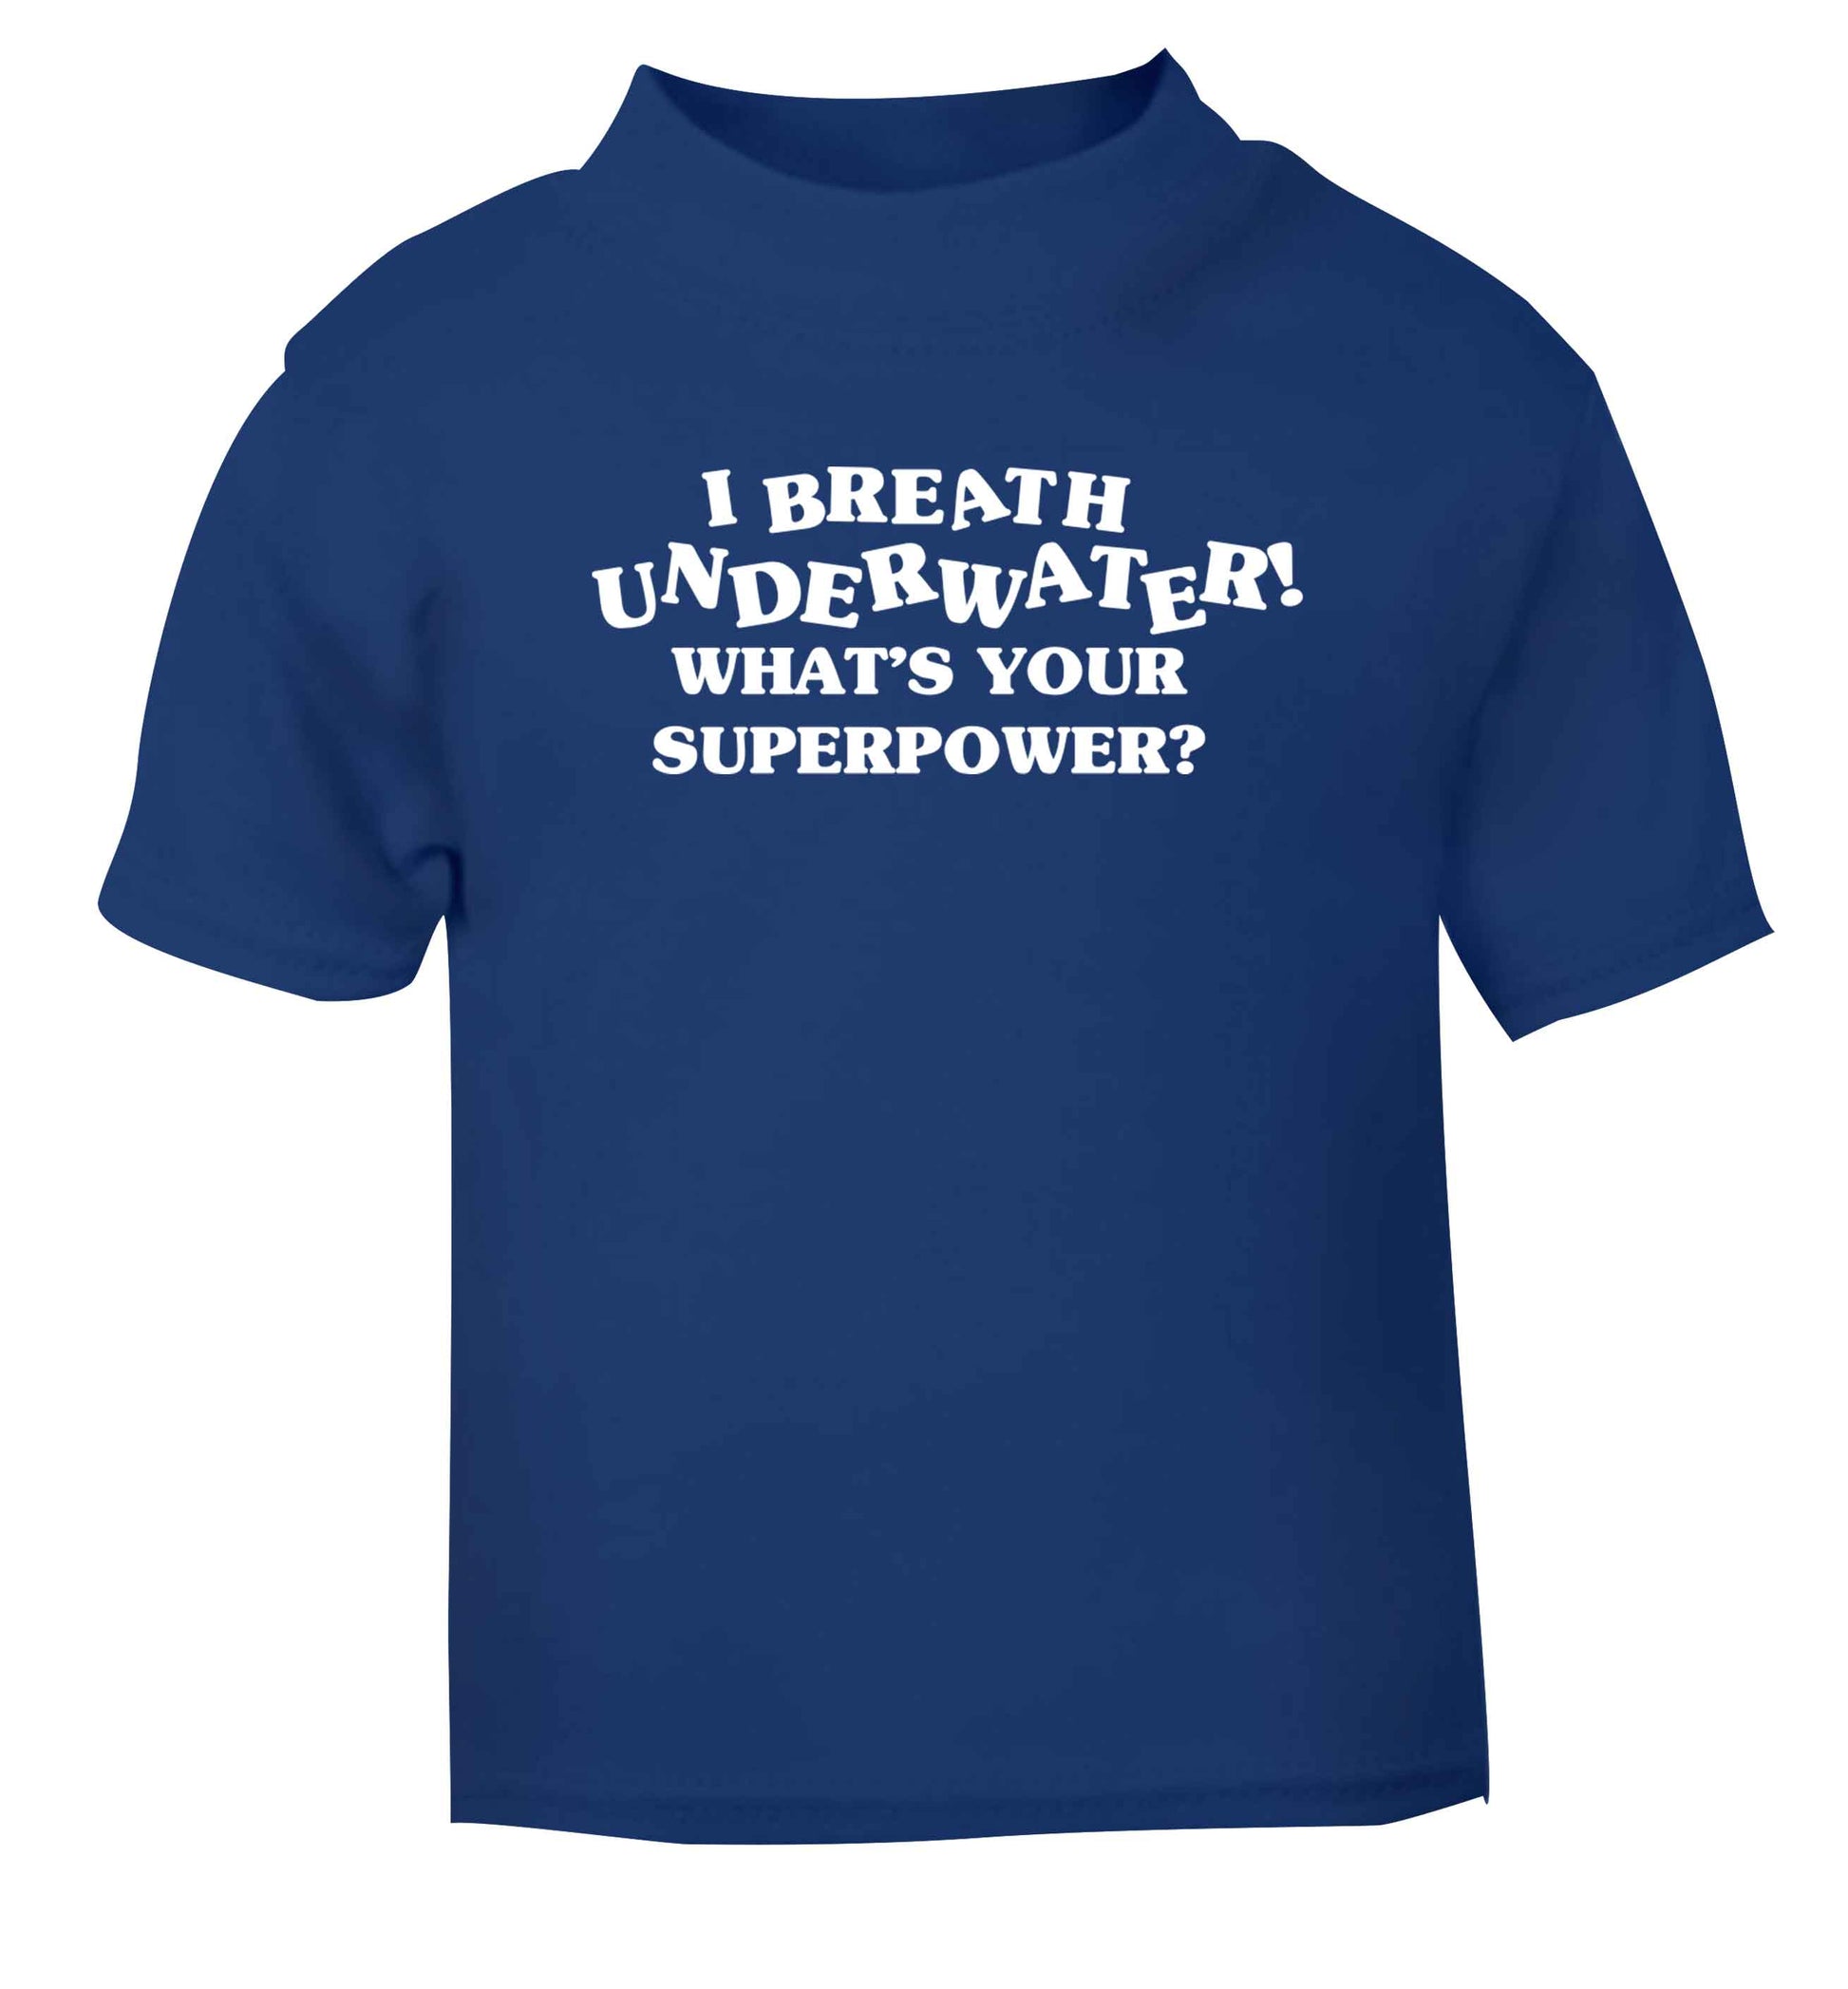 I breath underwater what's your superpower? blue Baby Toddler Tshirt 2 Years